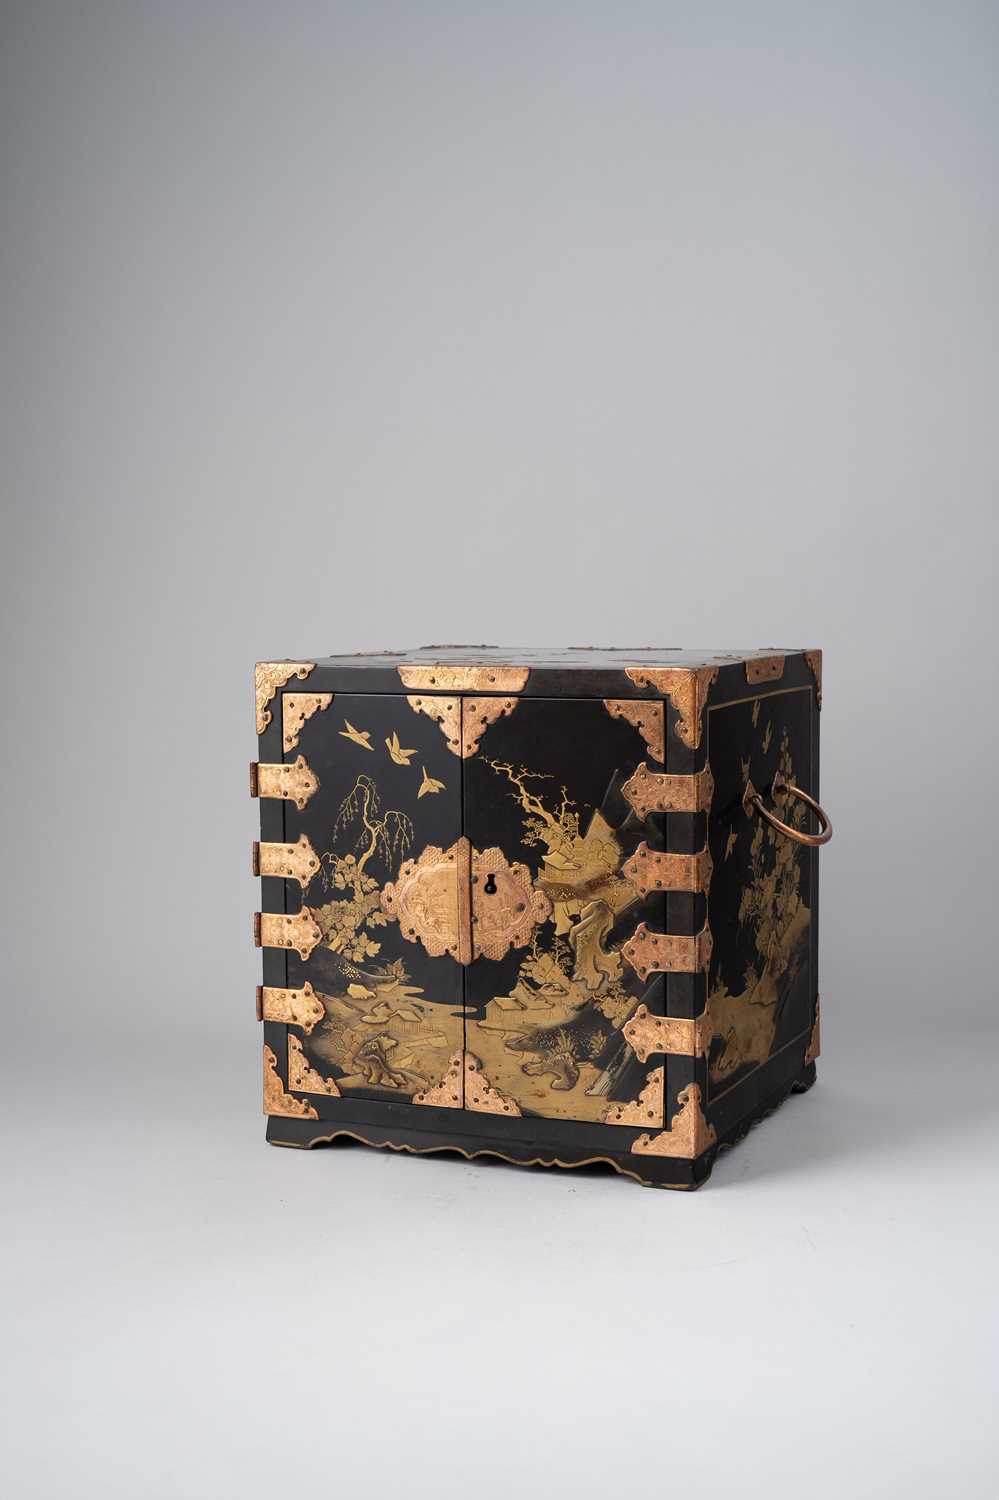 NO RESERVE A JAPANESE GOLD AND BLACK LACQUER CABINET EDO PERIOD, 17TH CENTURY For the European